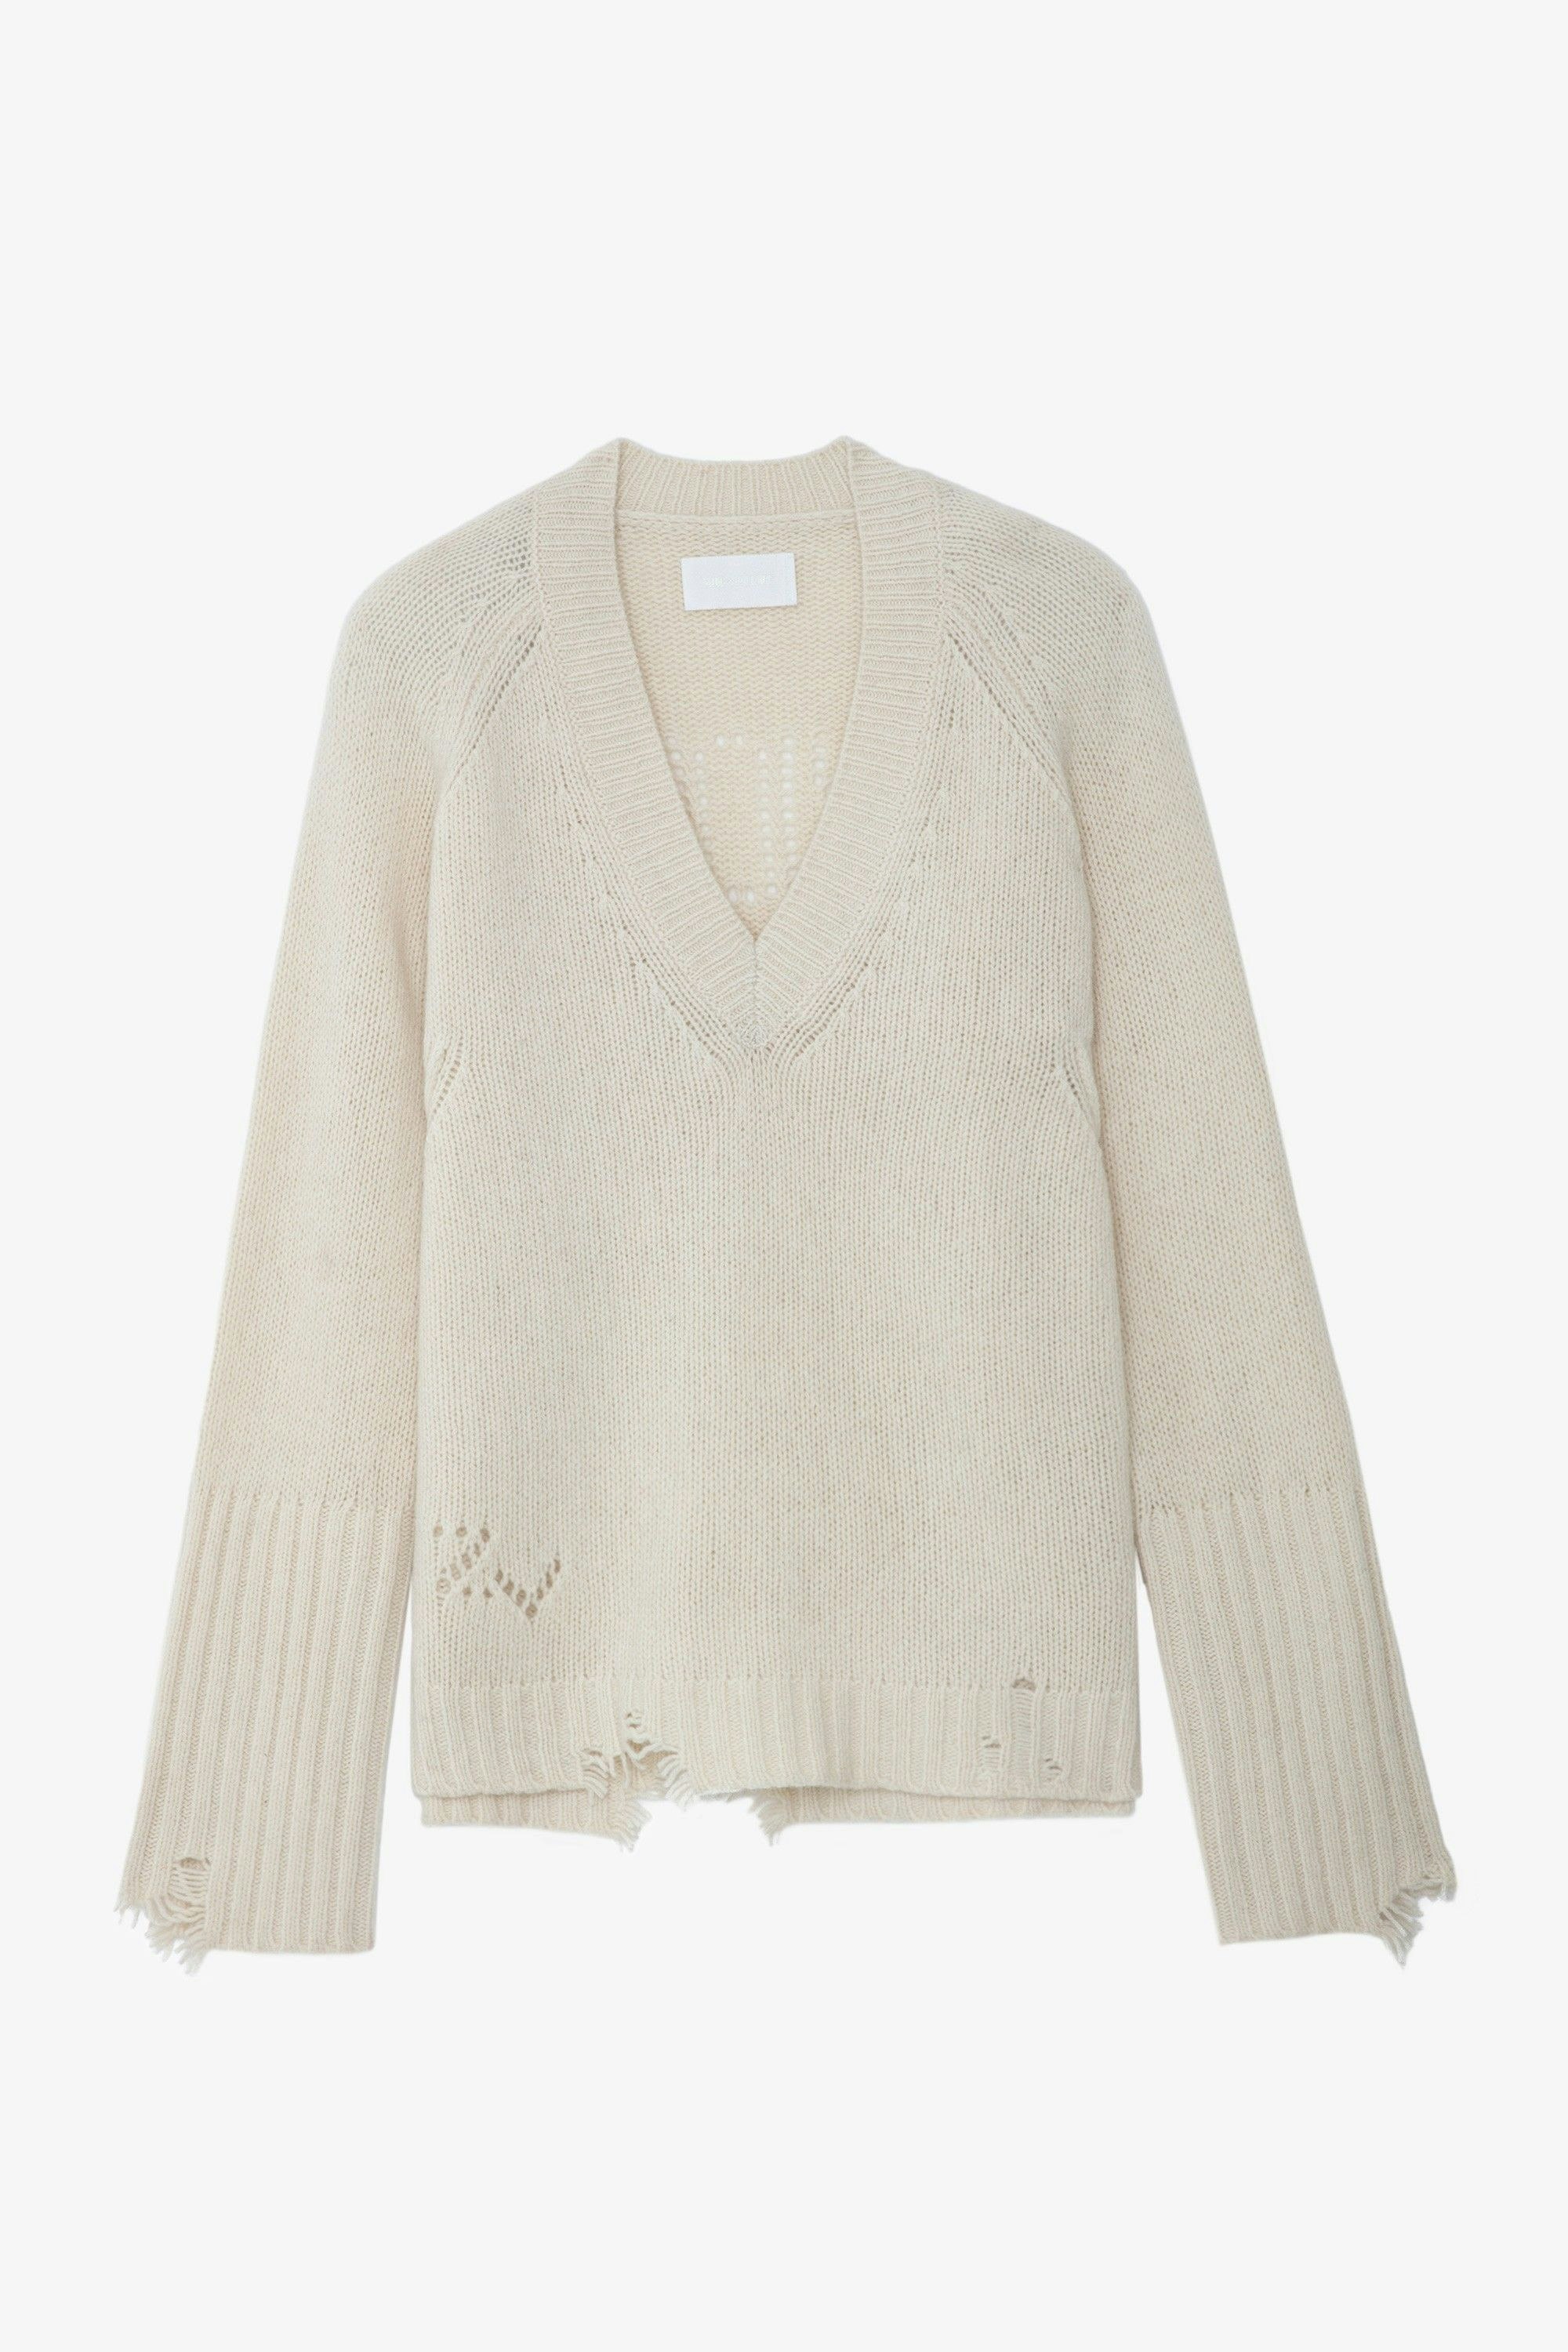 Valma Amour Sweater - Women's white merino wool sweater with pointelle "AMOUR" detail on back.